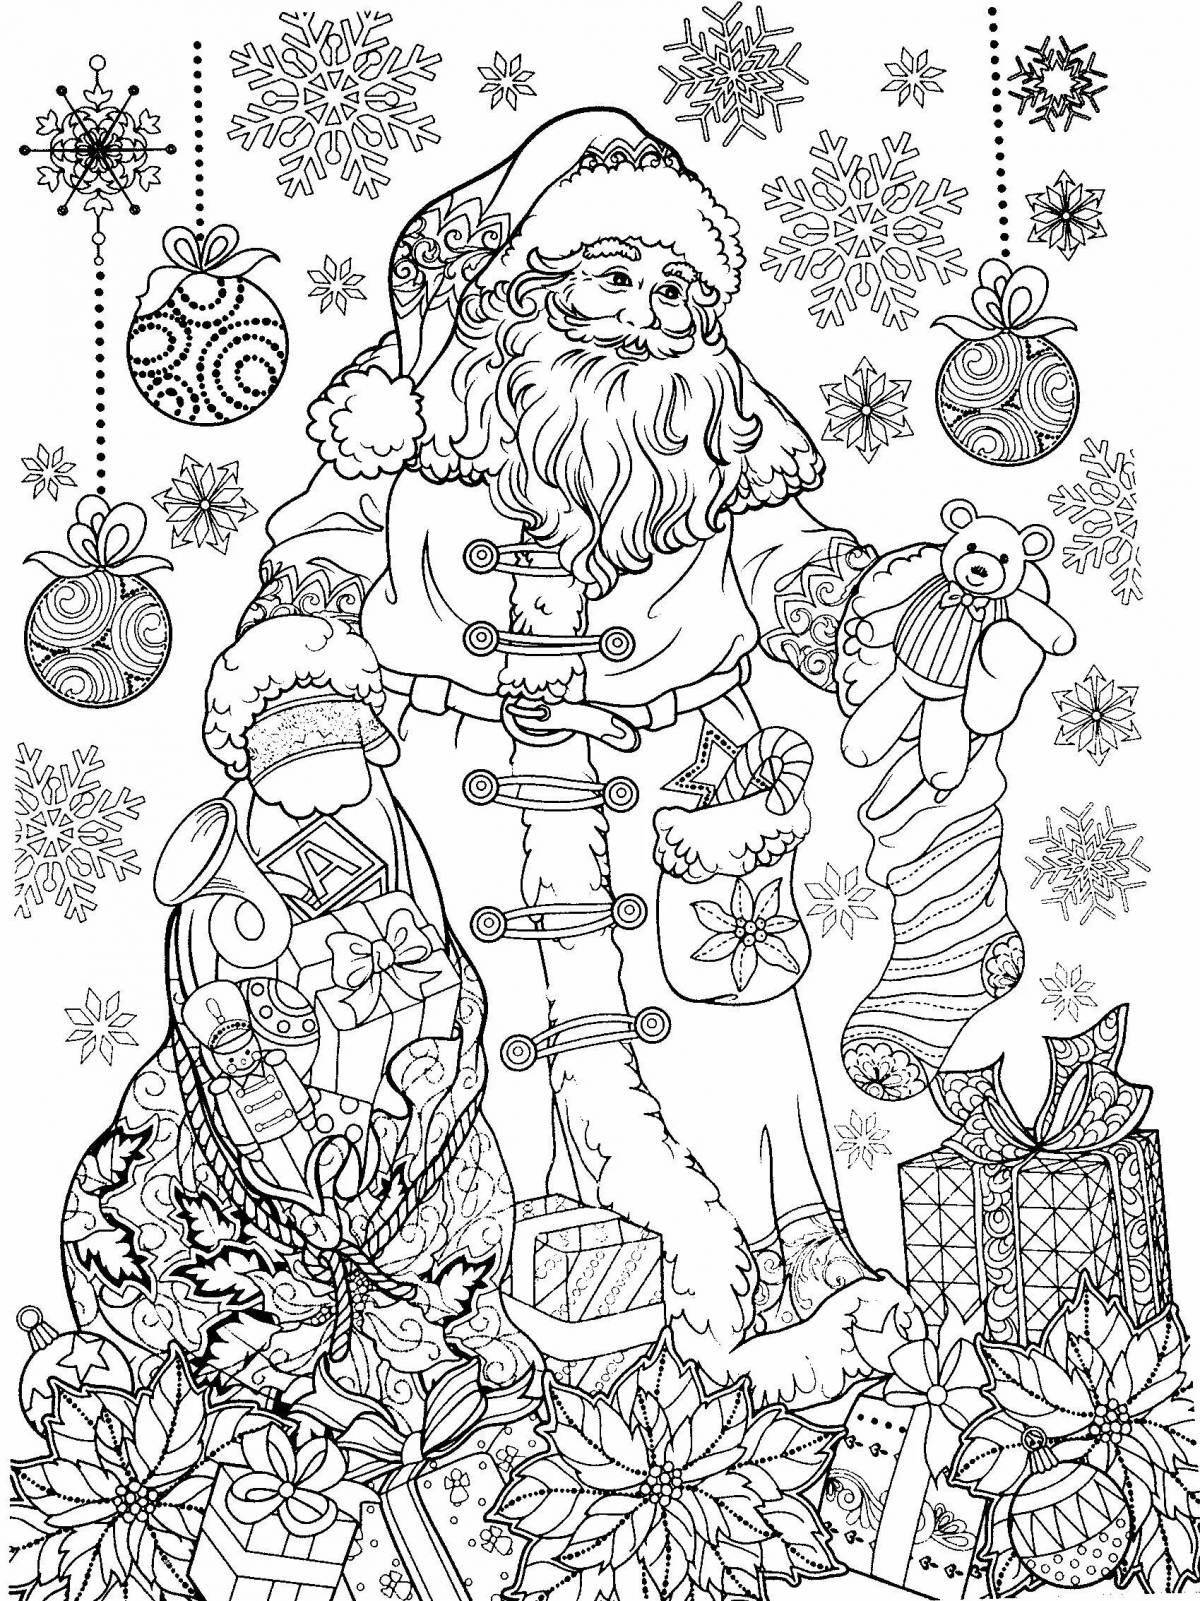 Live santa claus coloring book for girls